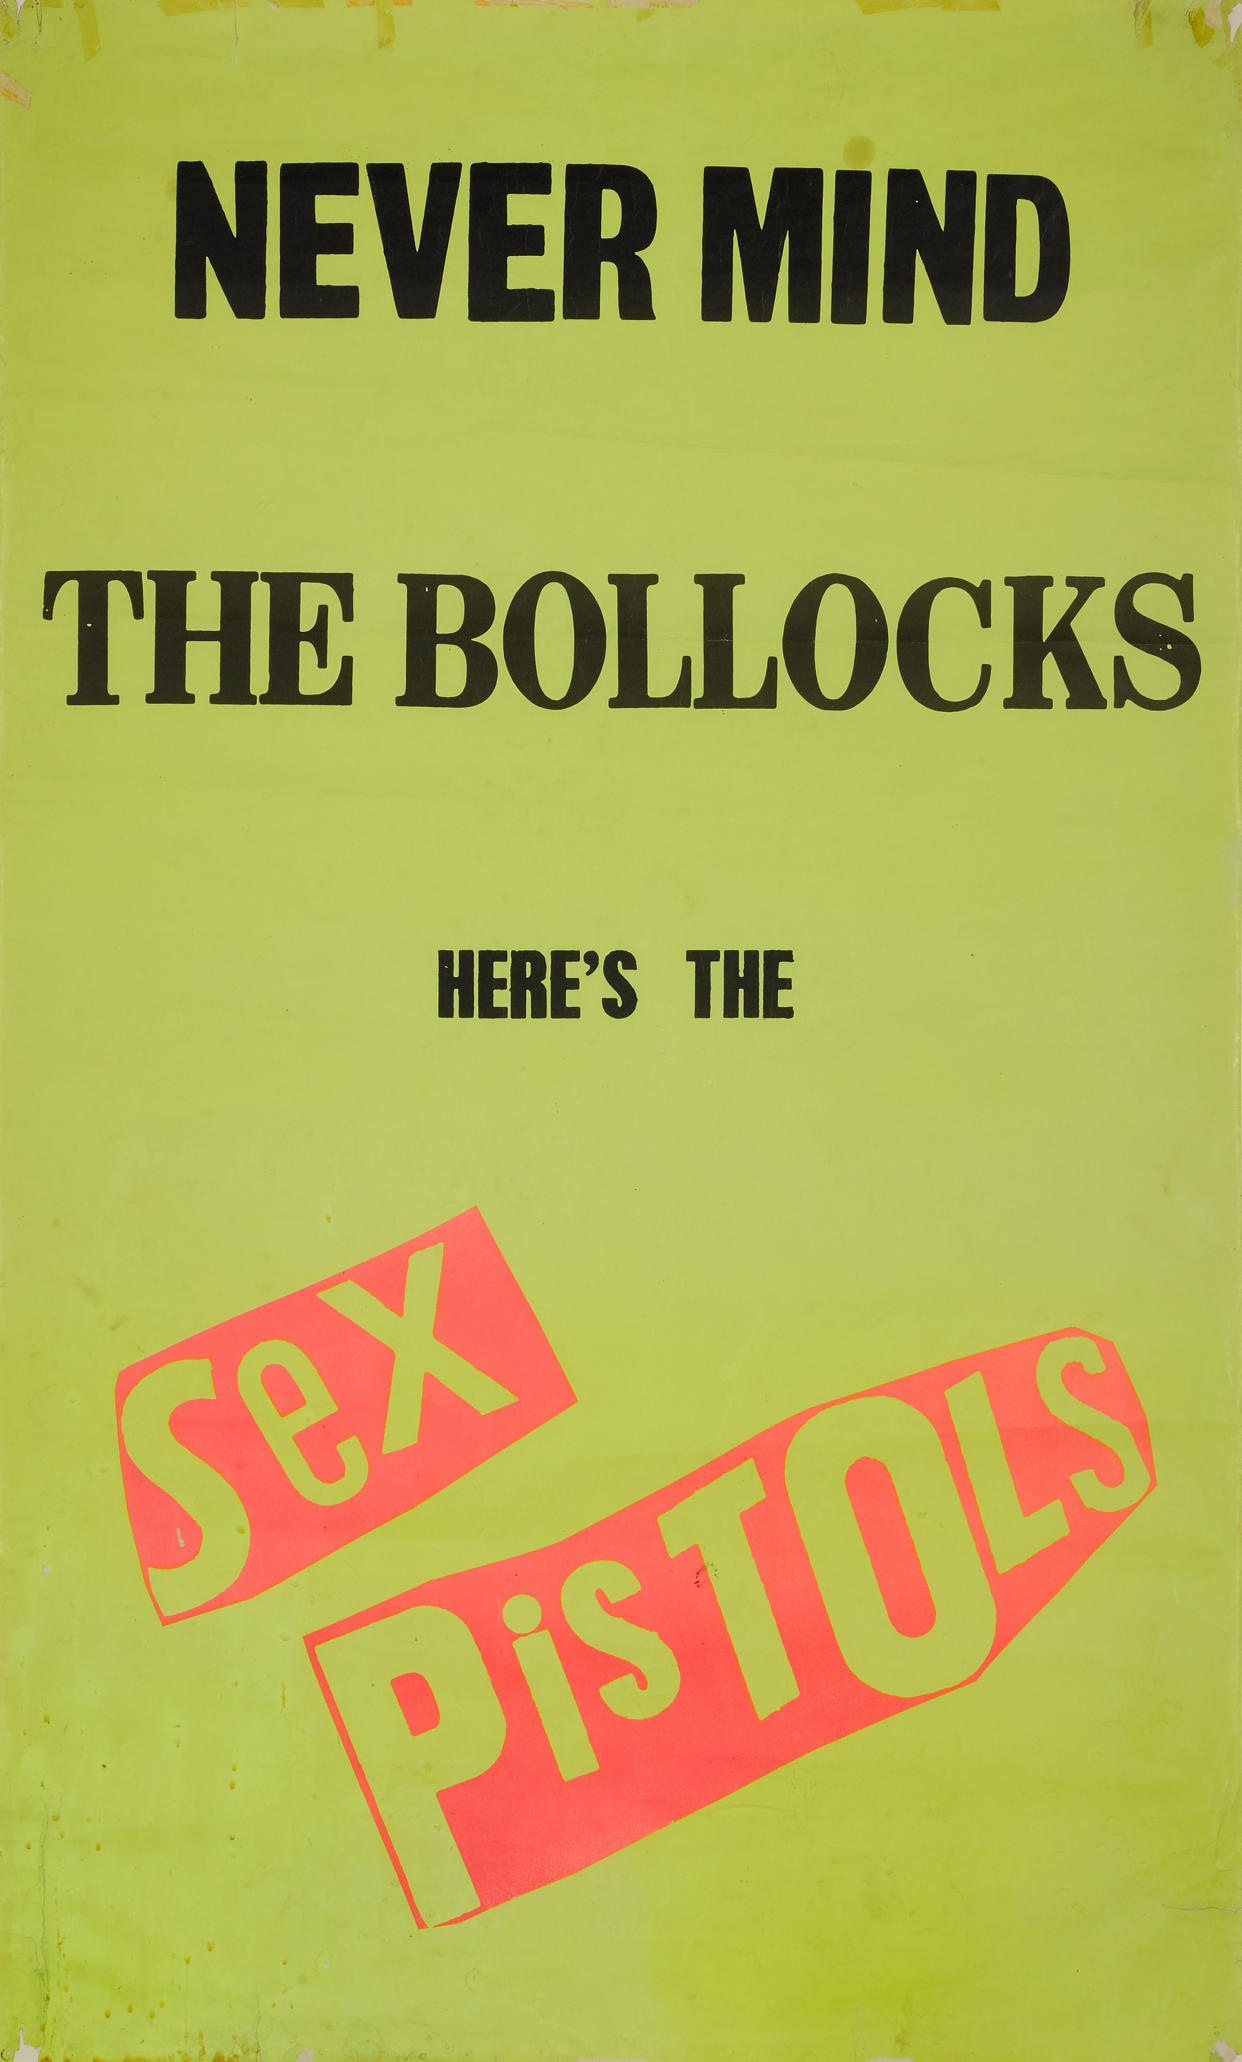 Jamie Reid’s Never Mind The Bollocks promotional poster, previously owned by Sid Vicious (Sotheby’s/PA)